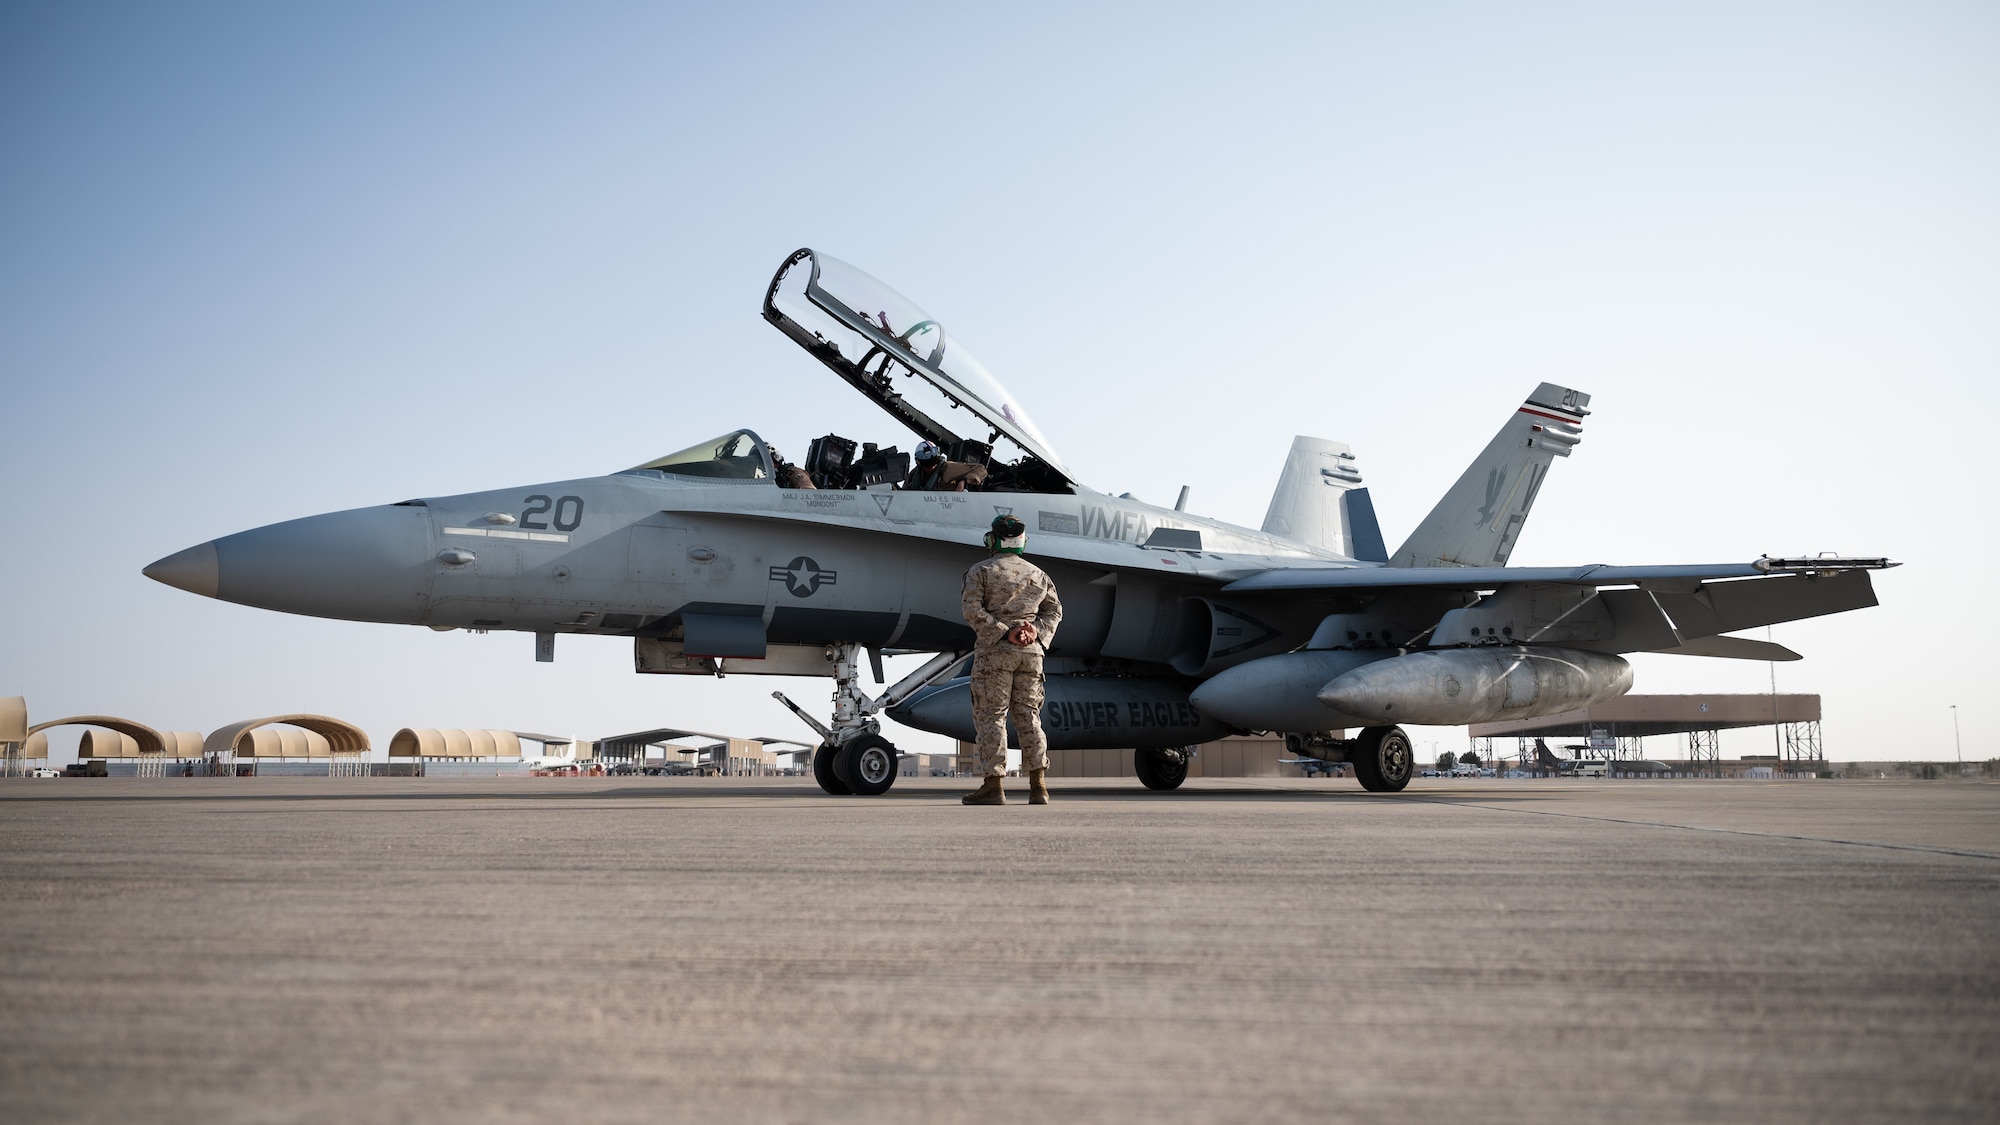 A U.S. Marine F/A-18 Hornet sits on the flight line at Prince Sultan Air Base, Kingdom of Saudi Arabia, Dec. 23, 2021. The arrival of the Marine Fighter Attack Squadron 115 improves the ability of the Combined Forces Air Component Commander to move forces fluidly across the theatre. (U.S. Air Force photo by Senior Airman Jacob B. Wrightsman)